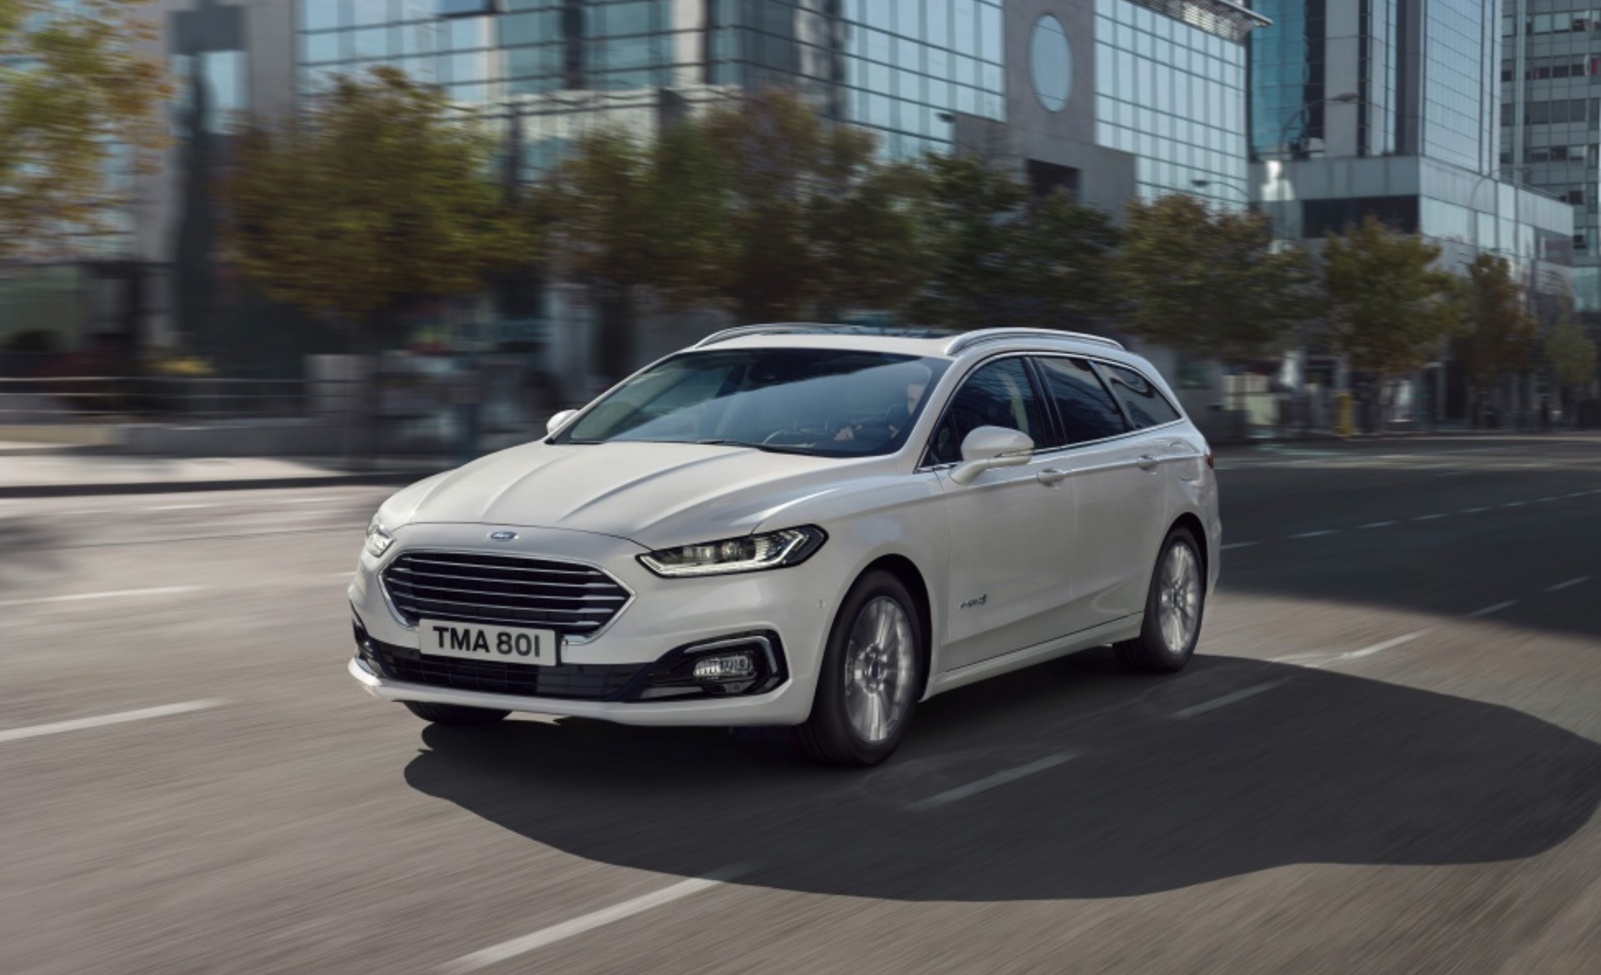 Ford Mondeo IV Wagon (facelift 2019) 2.0 iVCT (187 Hp) Hybrid Automatic 2019, 2020, 2021 